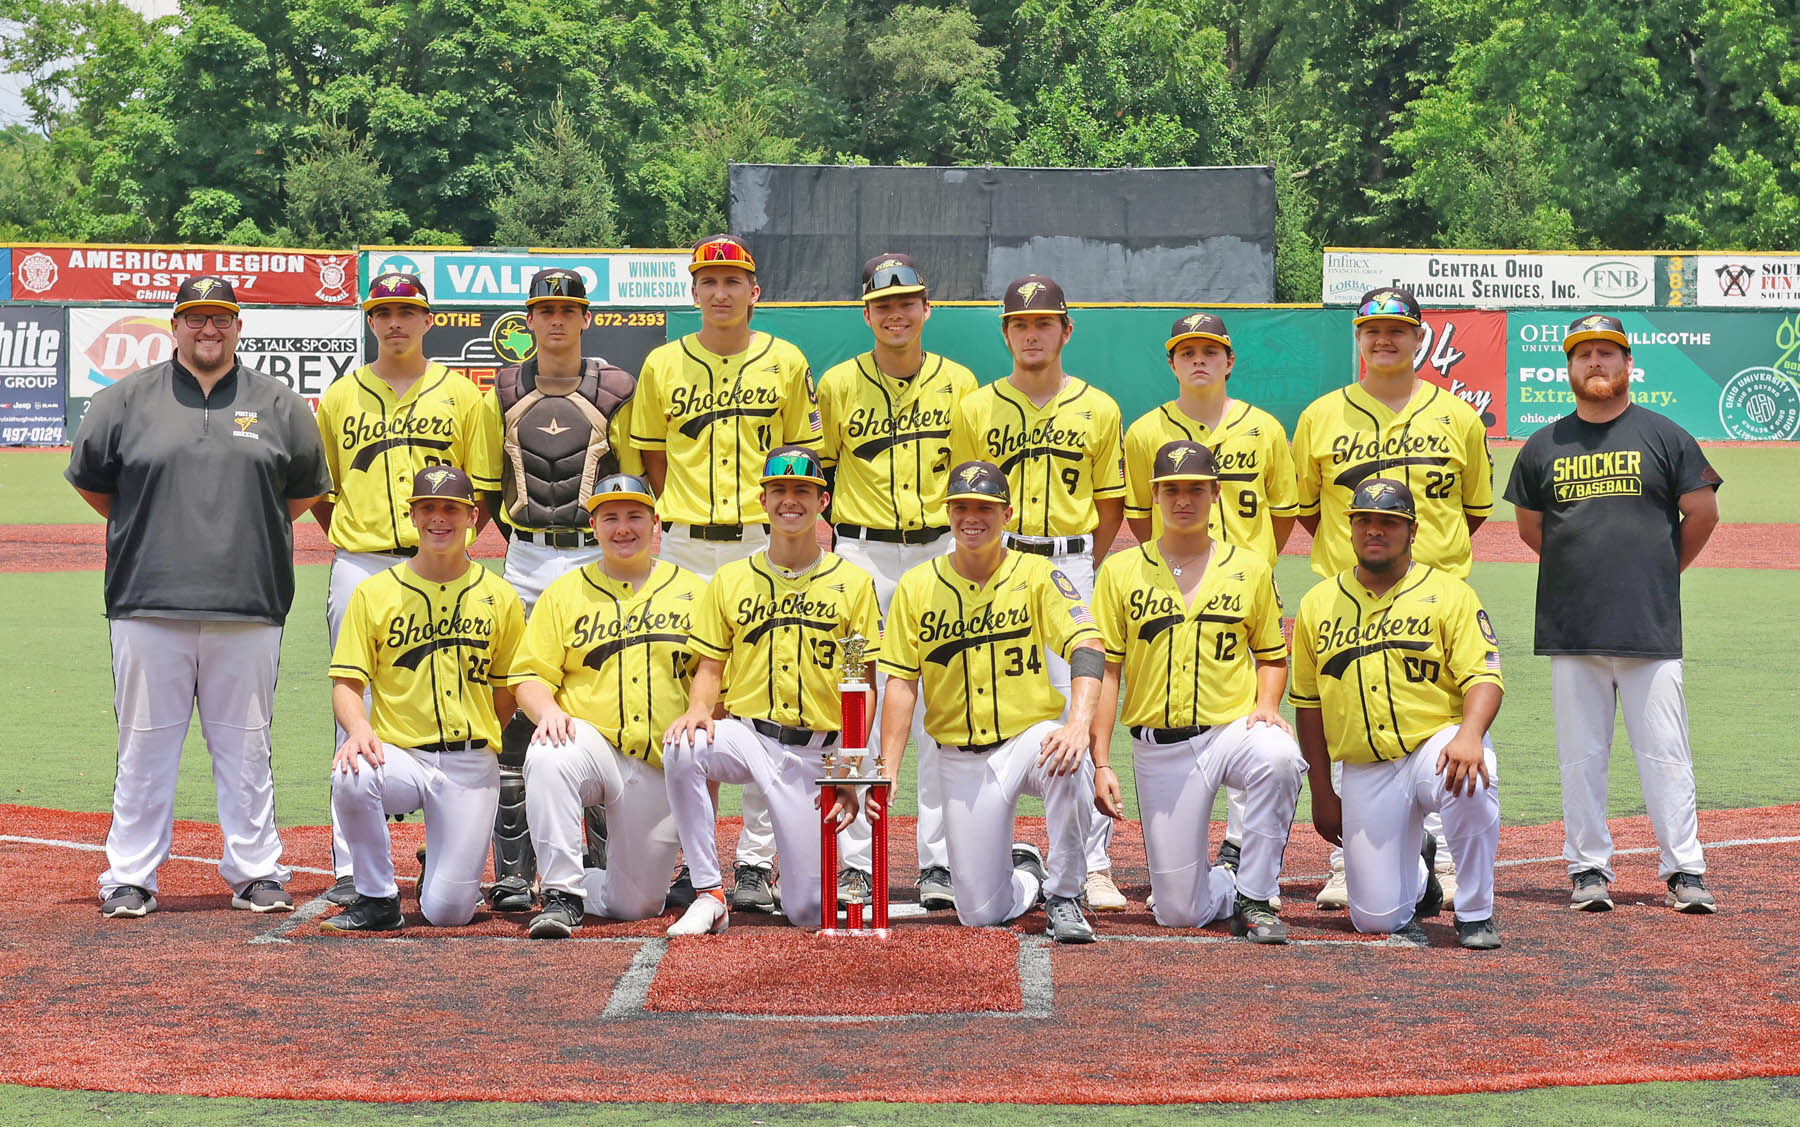 Shock the world: Junior Shockers win Region 5 title and advance to